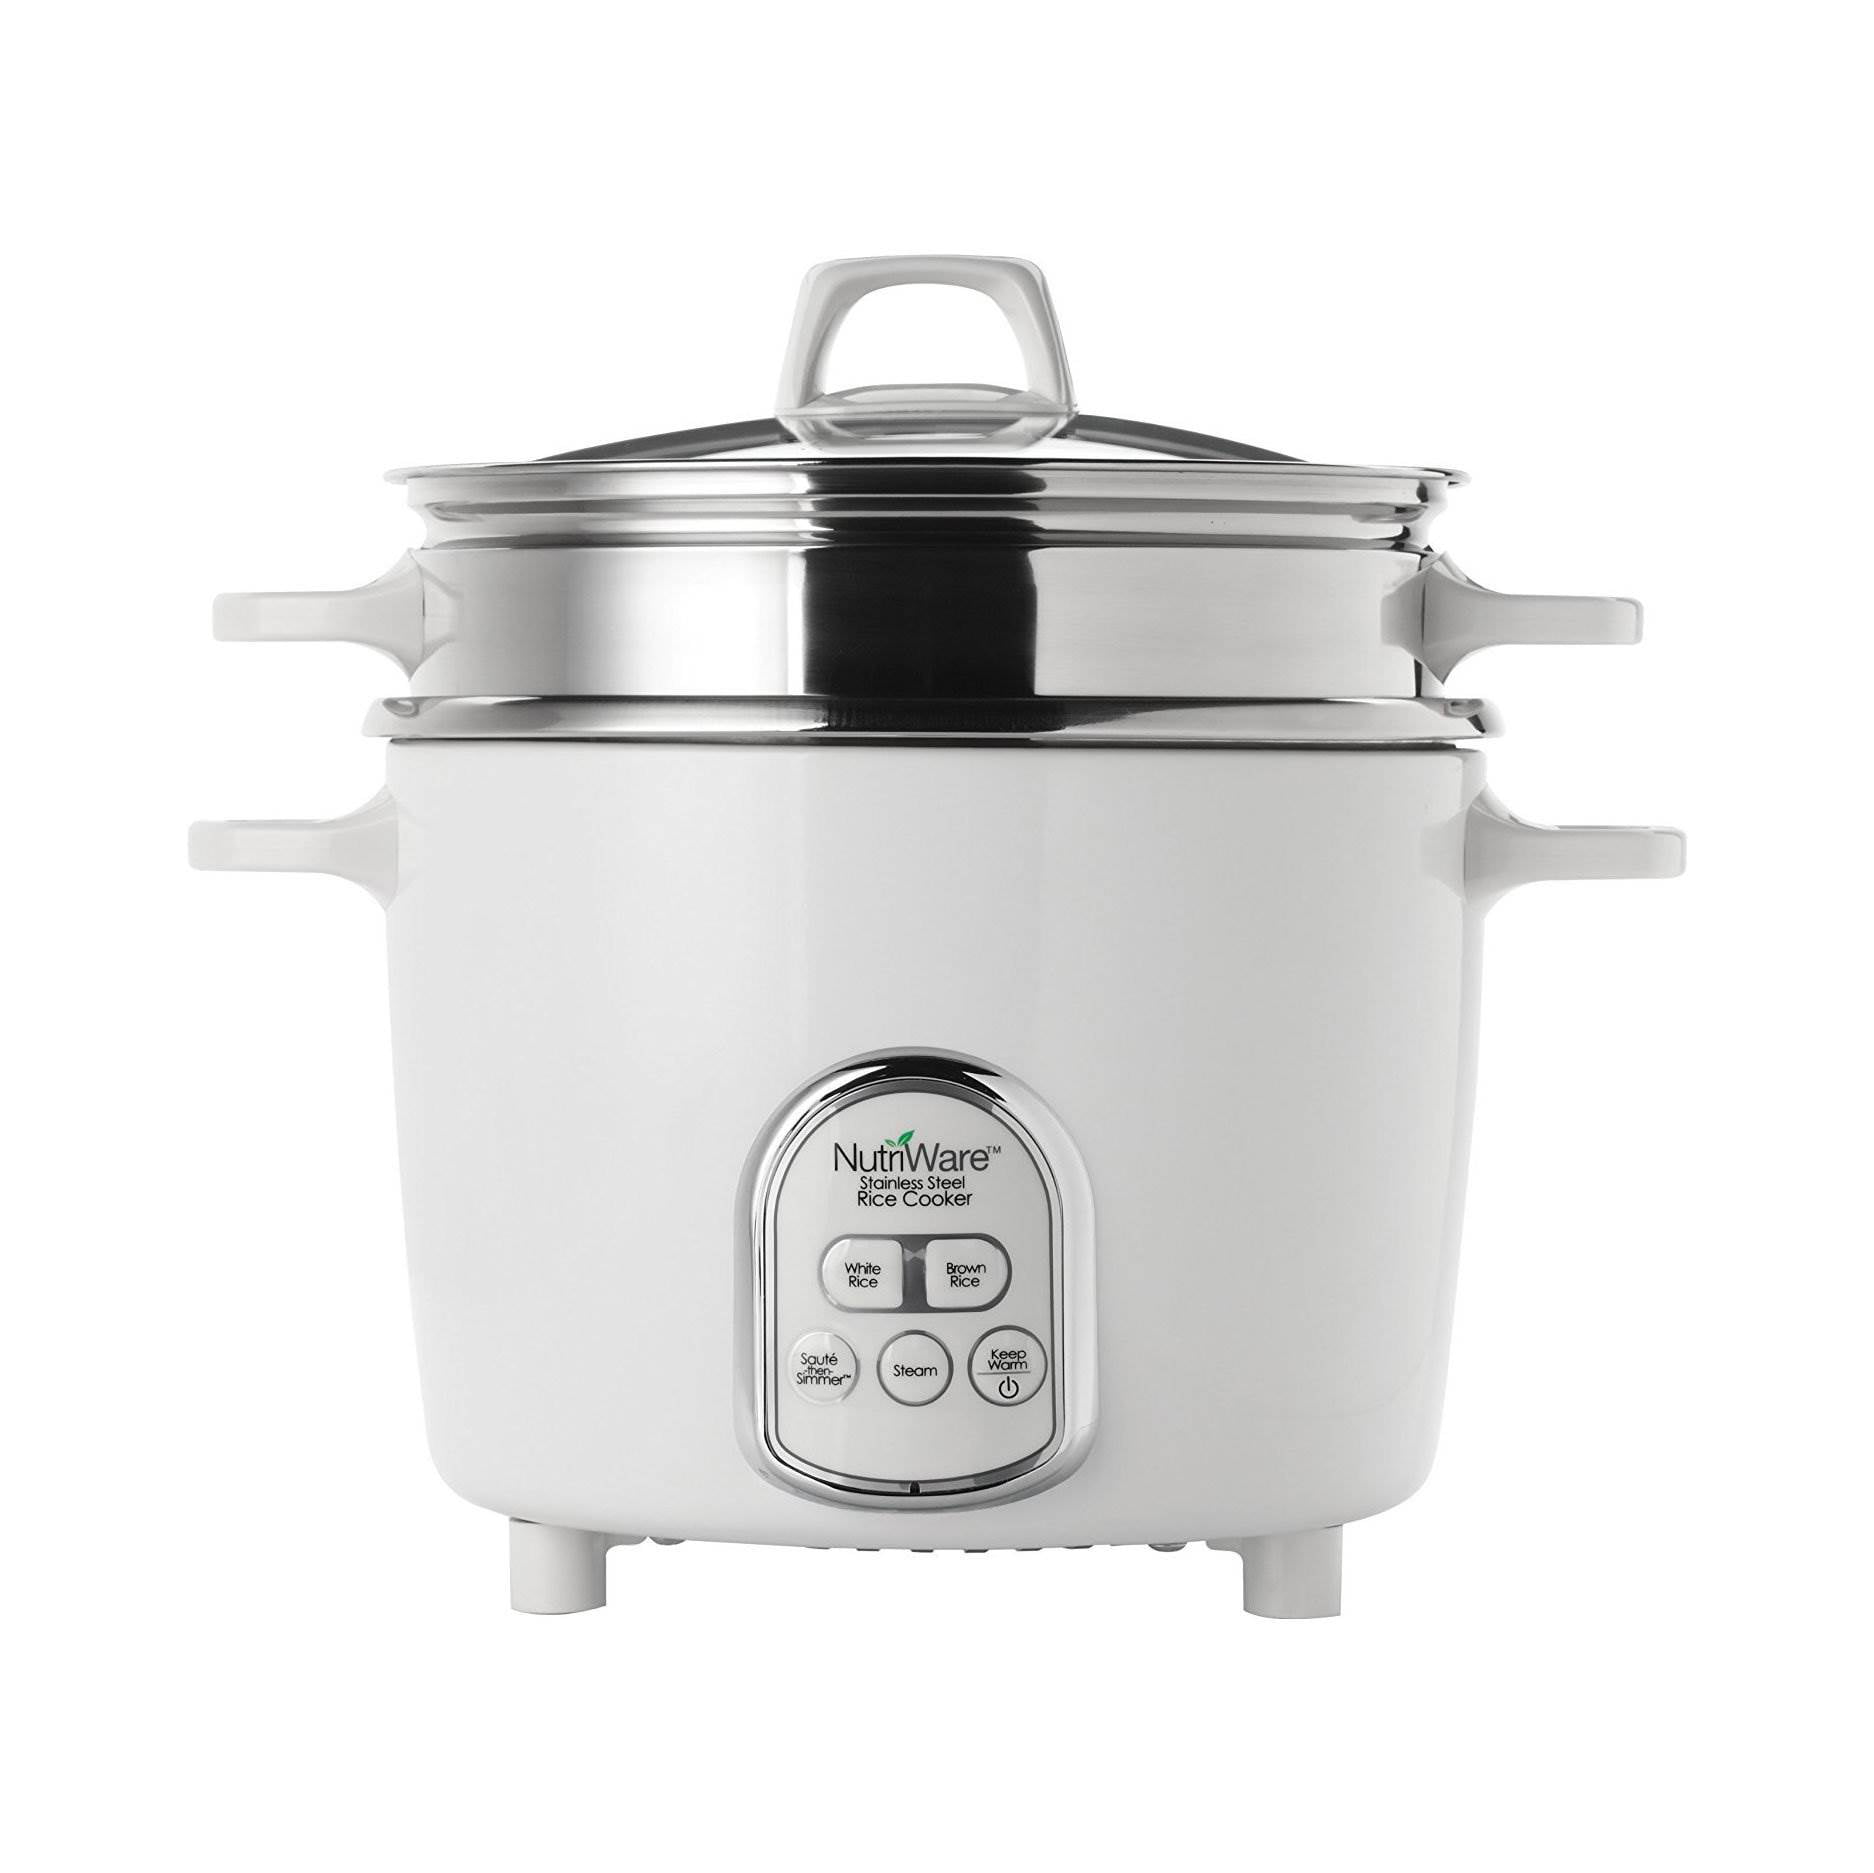 13 Best Aroma Nutriware Rice Cooker For 2023